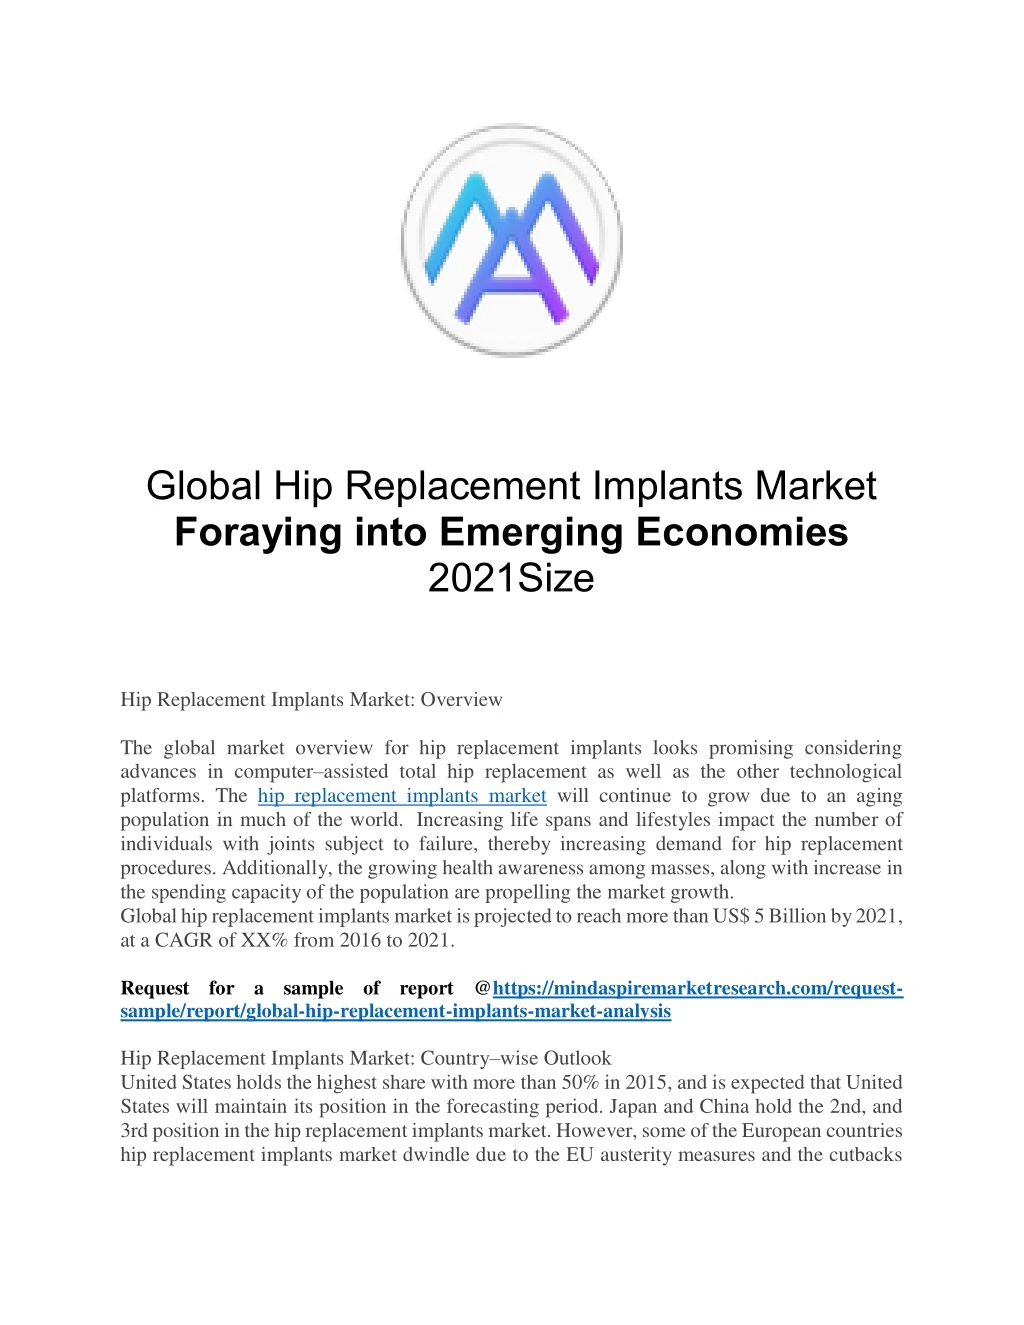 global hip replacement implants market foraying